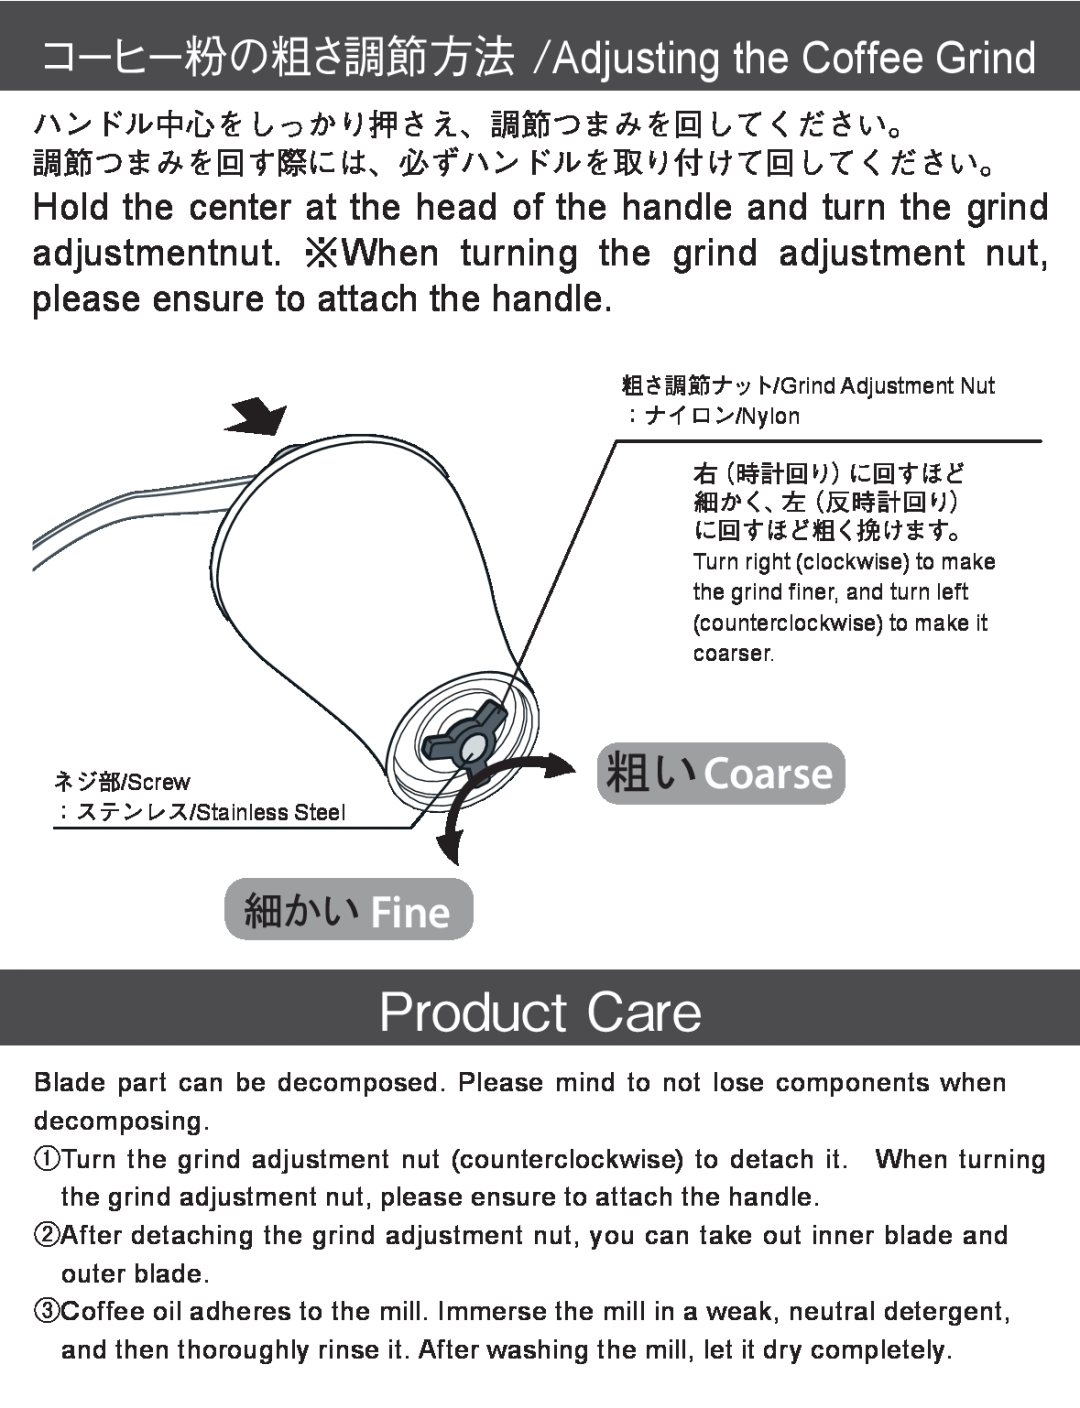 Hario Glass MSS-1 1101 instruction manual Product Care, Fine, コーヒー粉の粗さ調節方法 /Adjusting the Coffee Grind, Coarse 